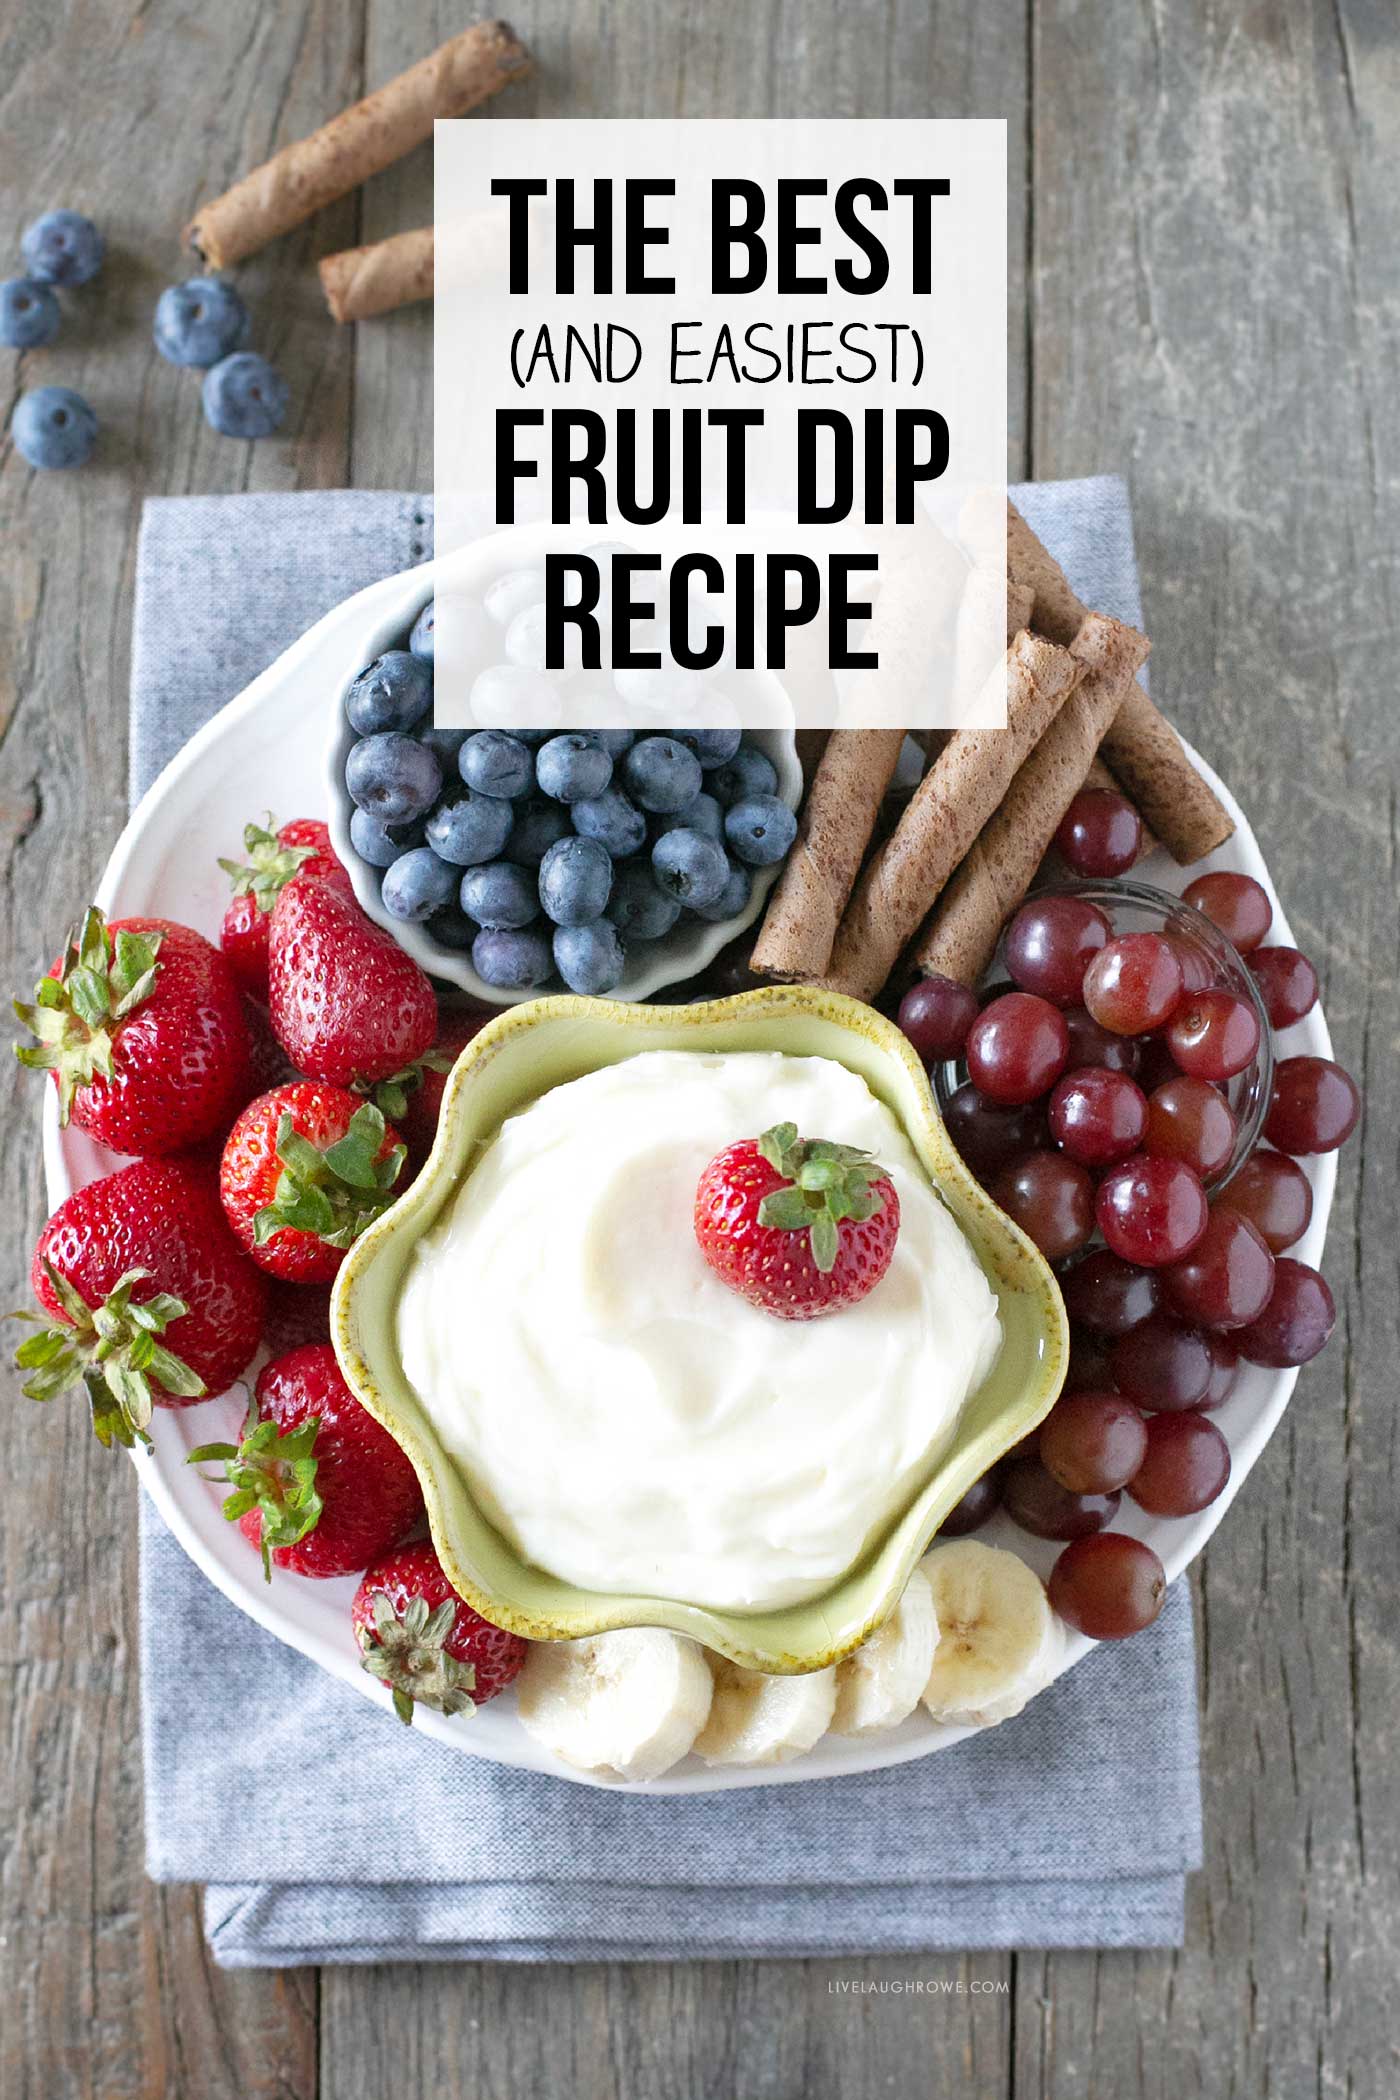 Fruit Dip Picture with Text Caption